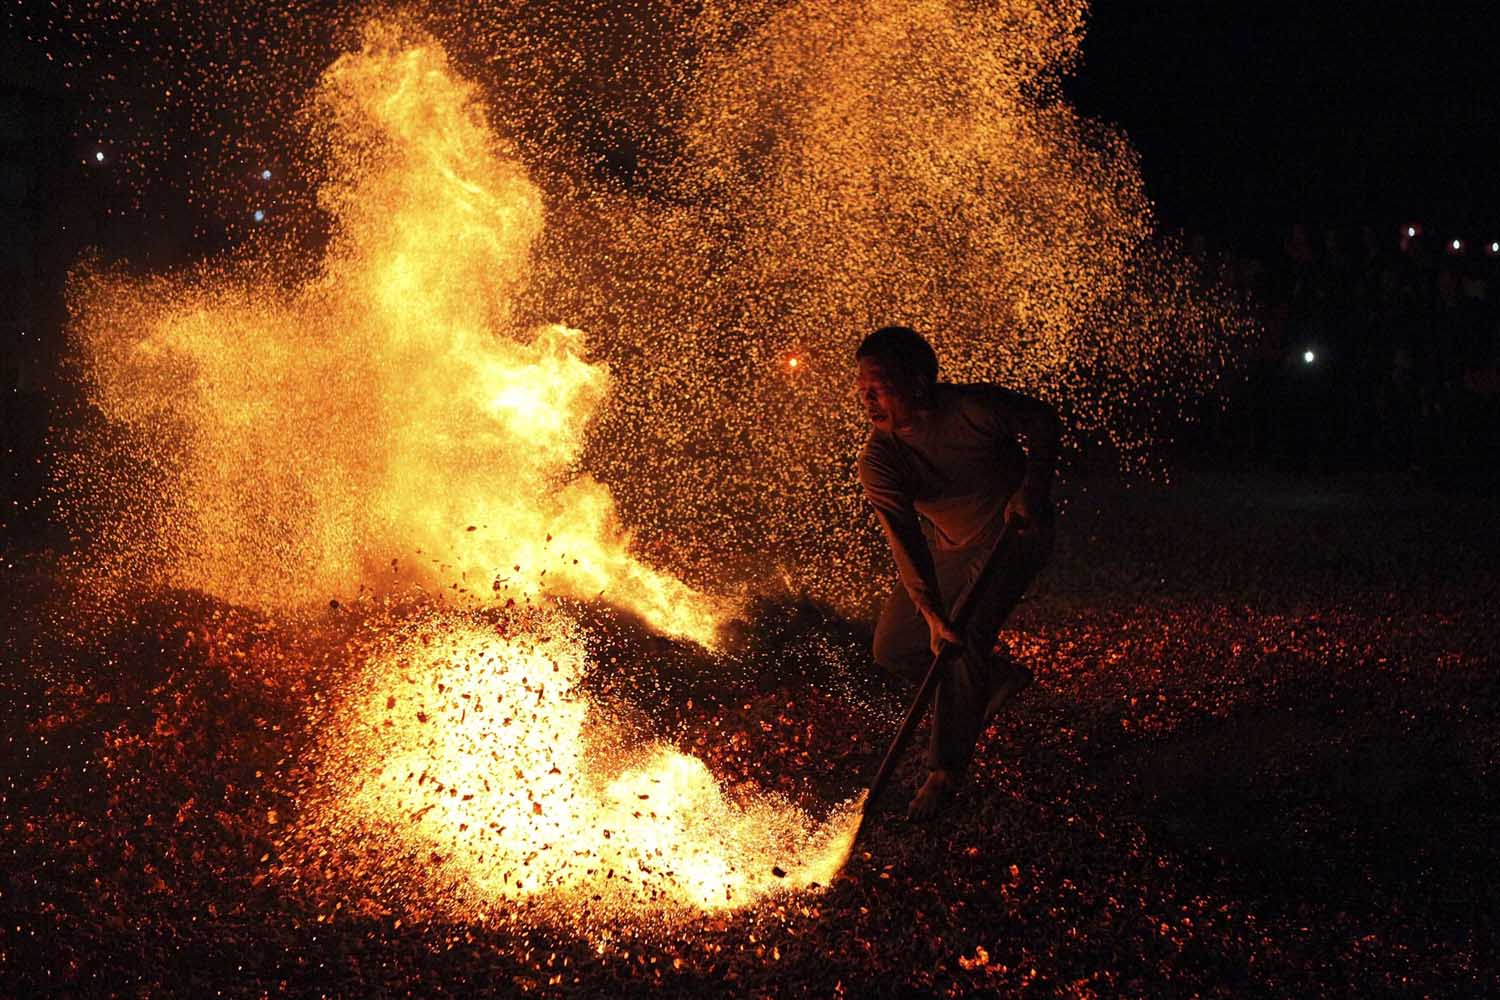 Nov. 25, 2013. A man sweeps burning charcoal as he participates in the traditional ritual called  Lianhuo , or  fire walking,  in Pan'an county, Zhejiang province, China.